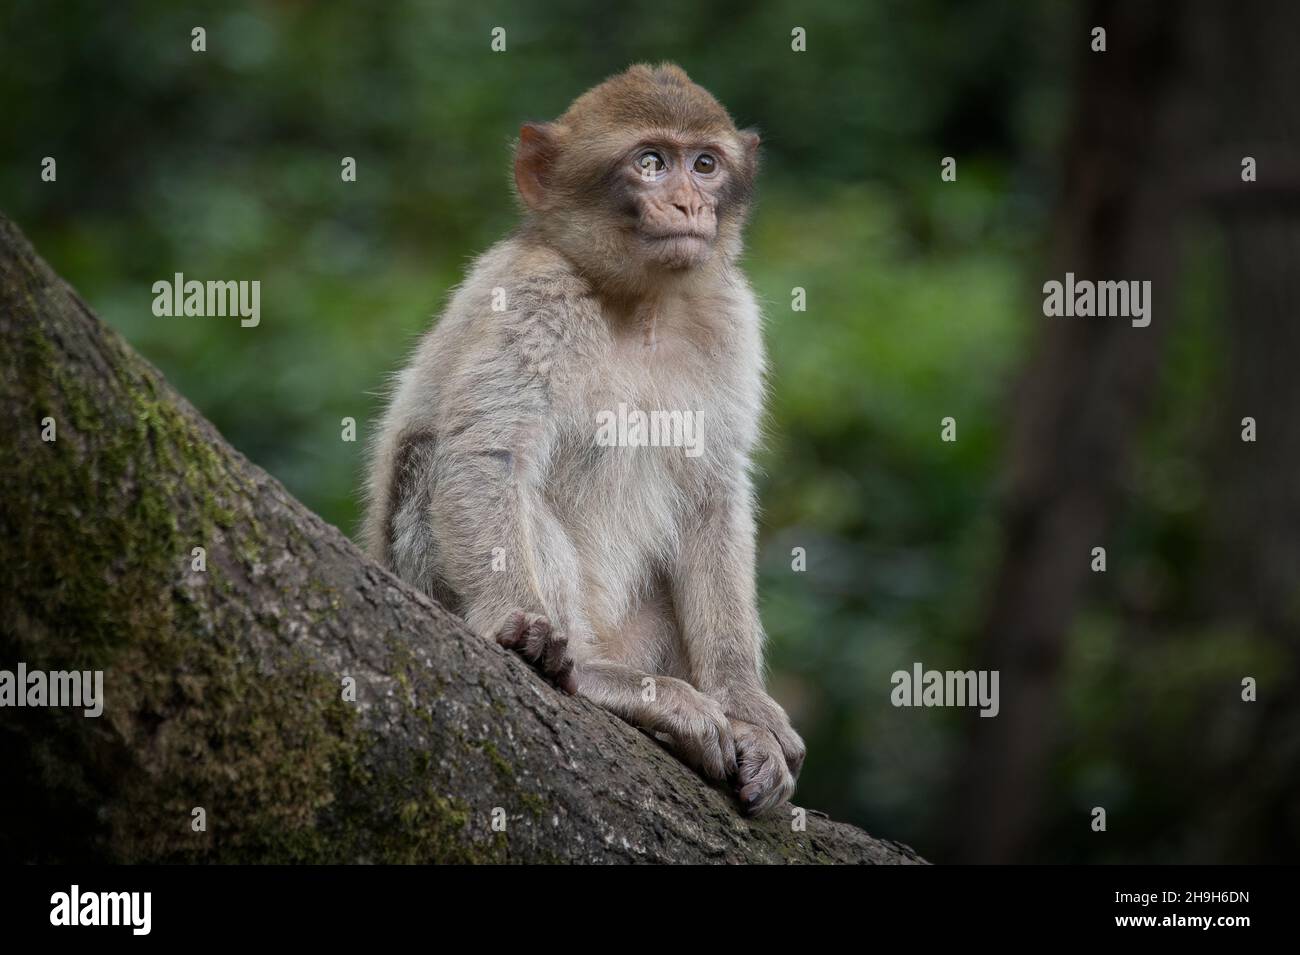 A close up portrait of a young barbary macaque sitting on a tree branch Stock Photo